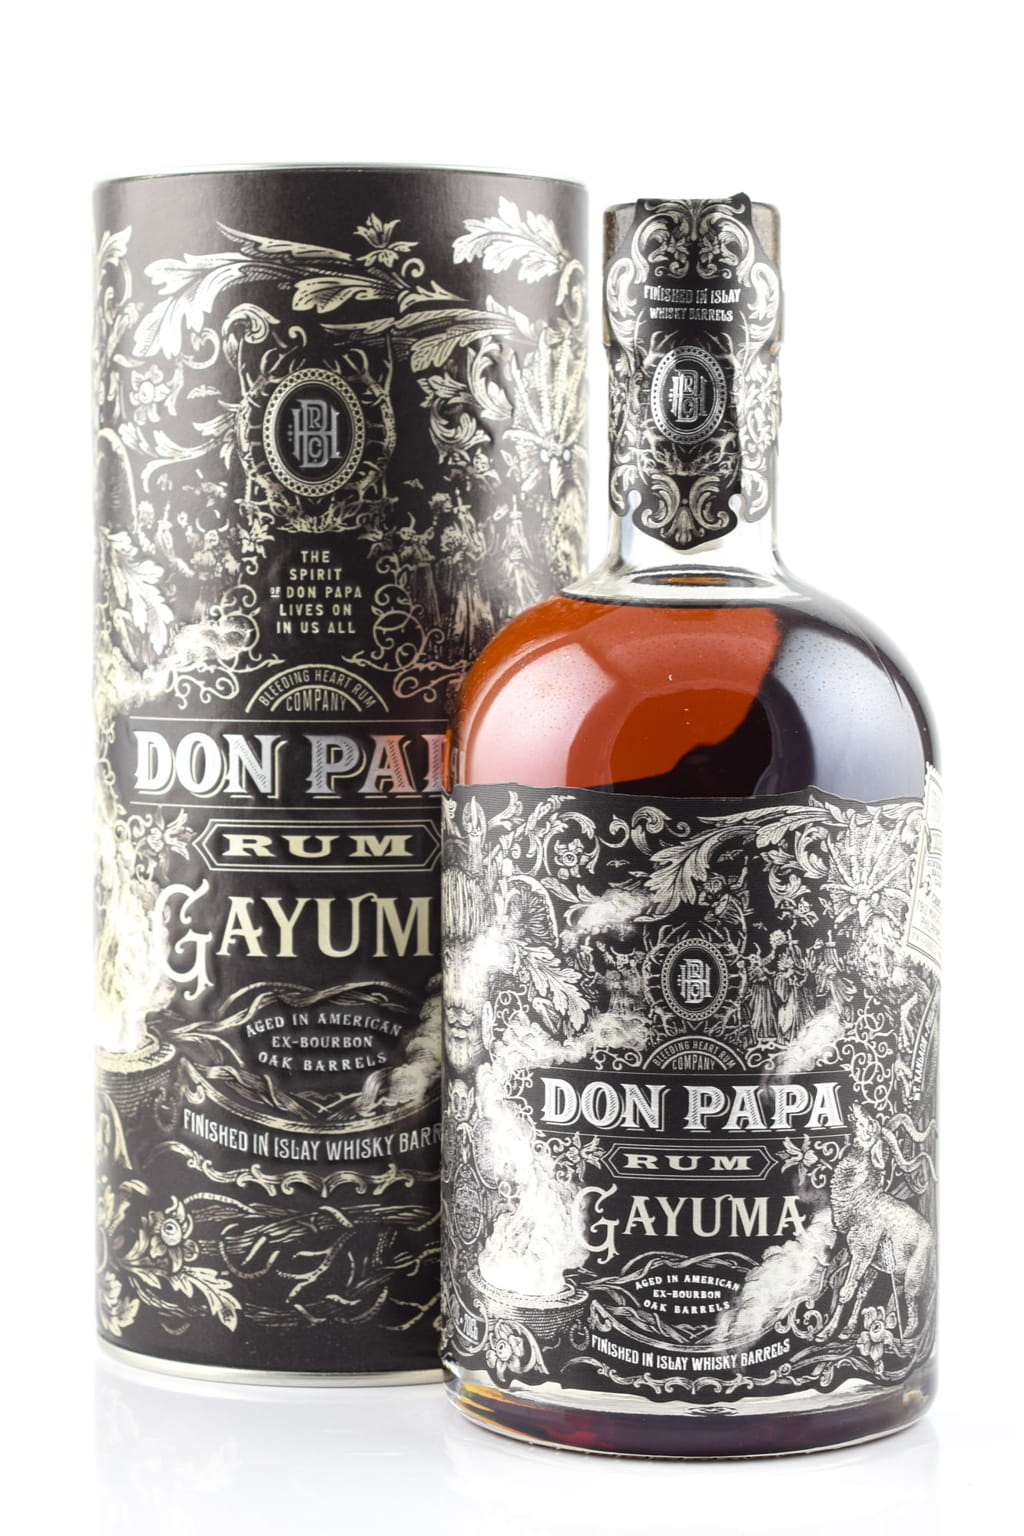 ᐅ Don Papa Gayuma - the special edition - buy now online | Home of Malts